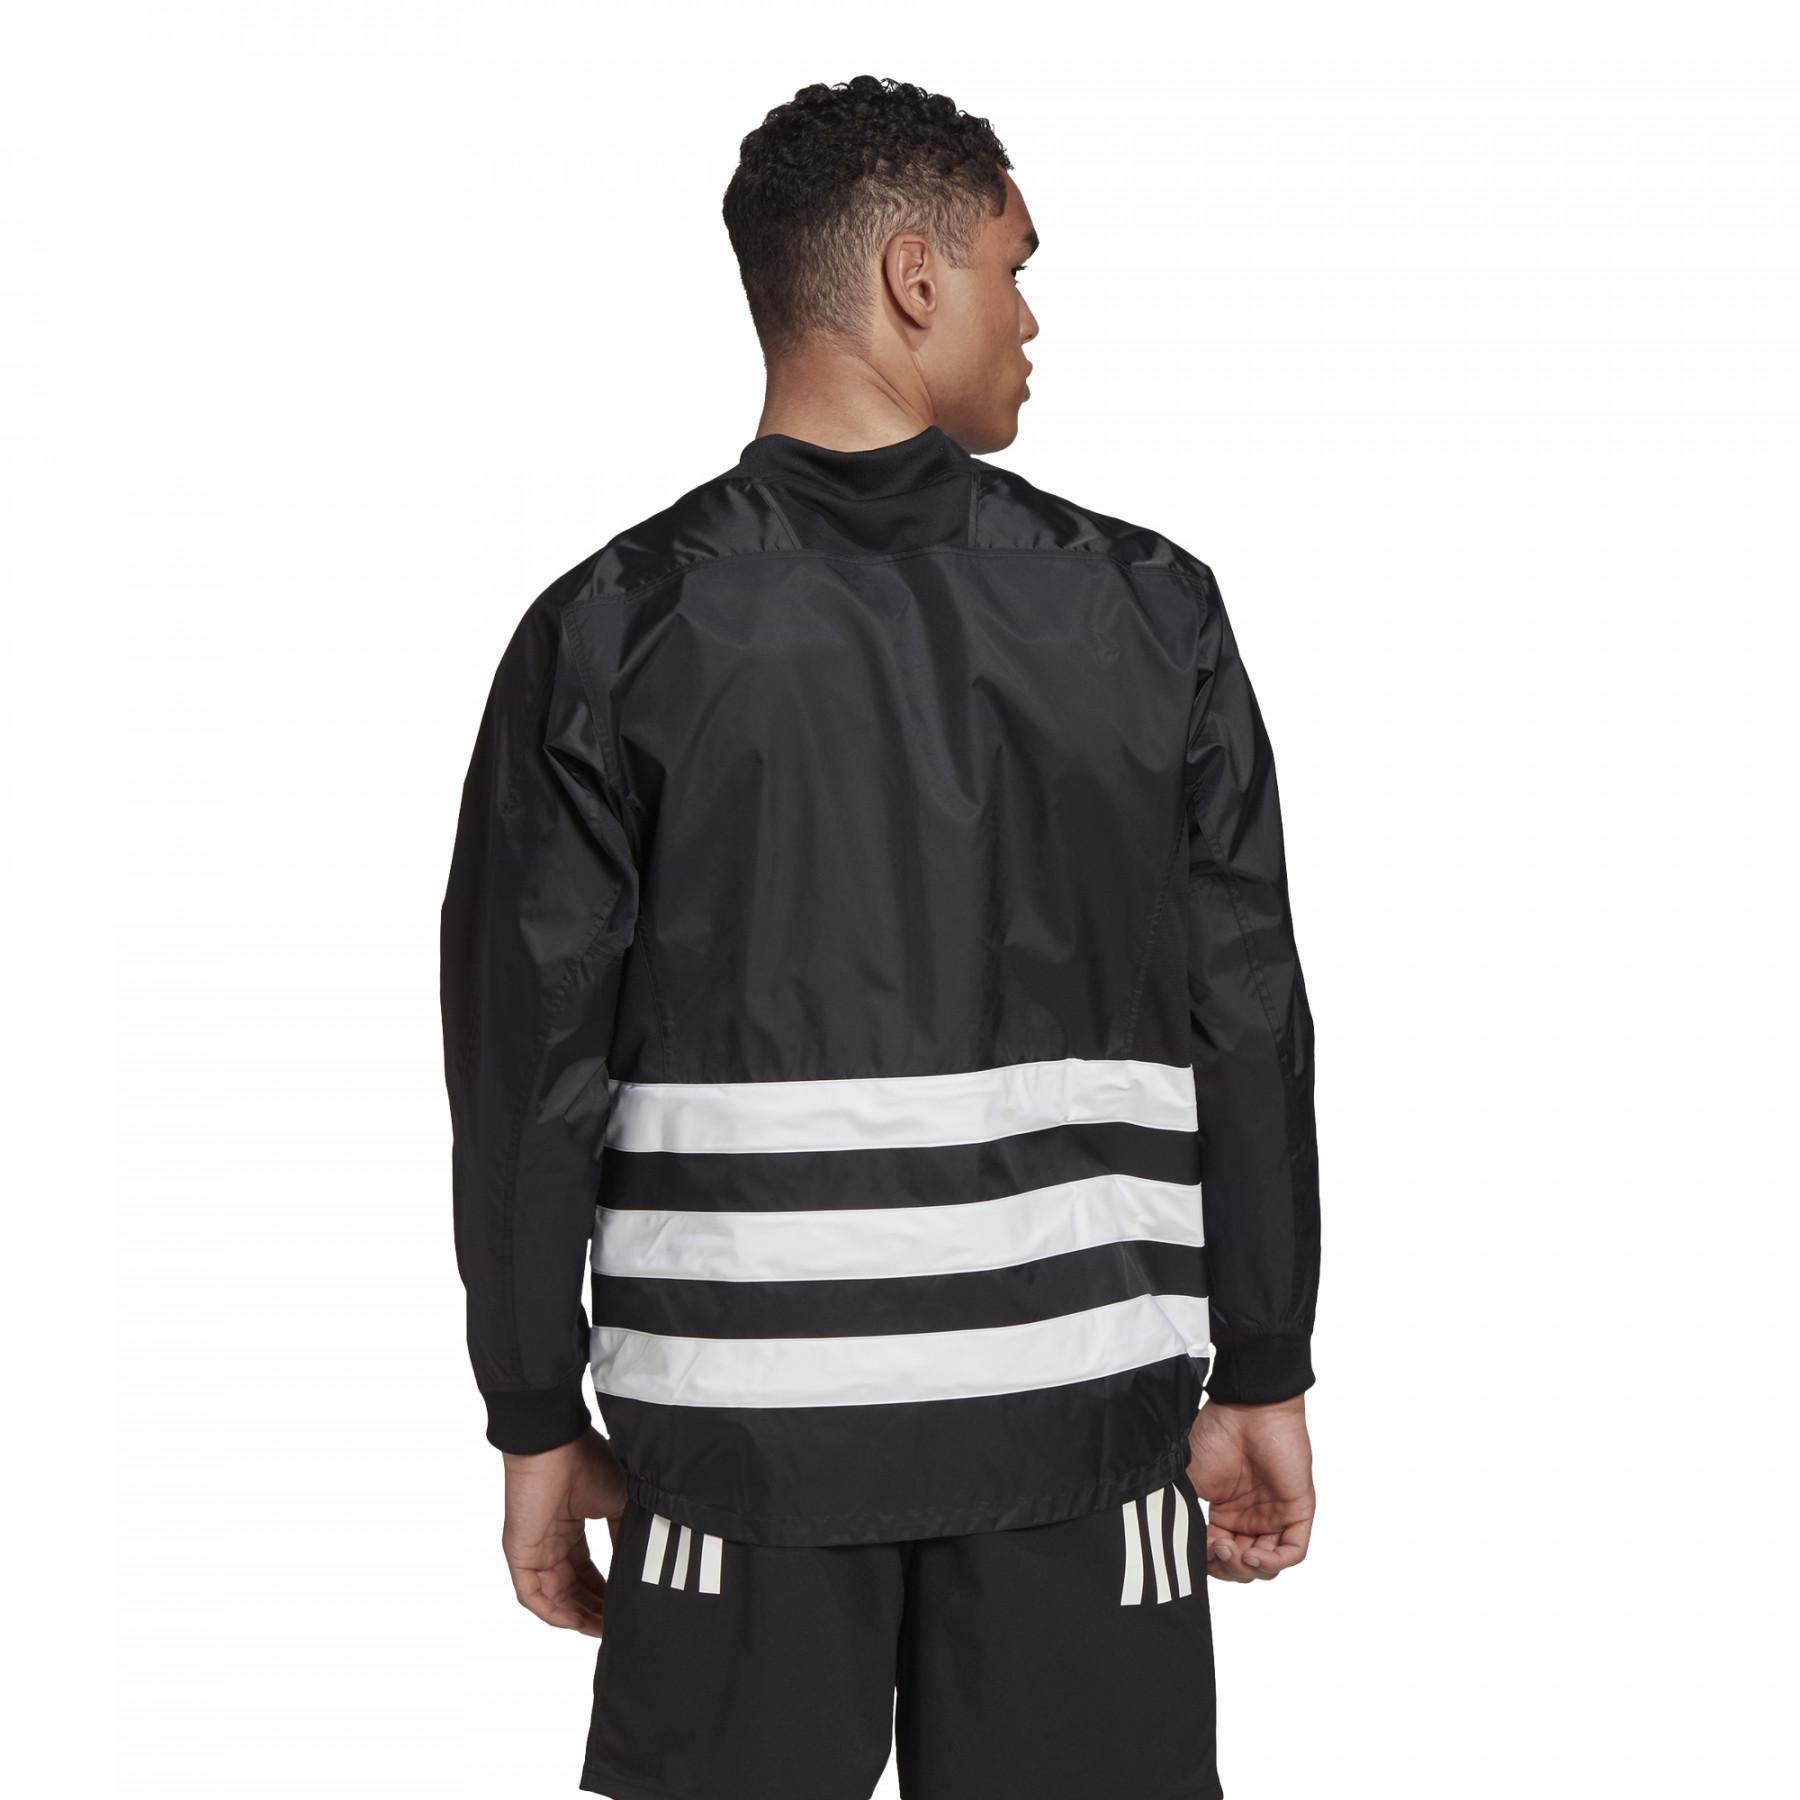 Giacca adidas Rugby Wind Top